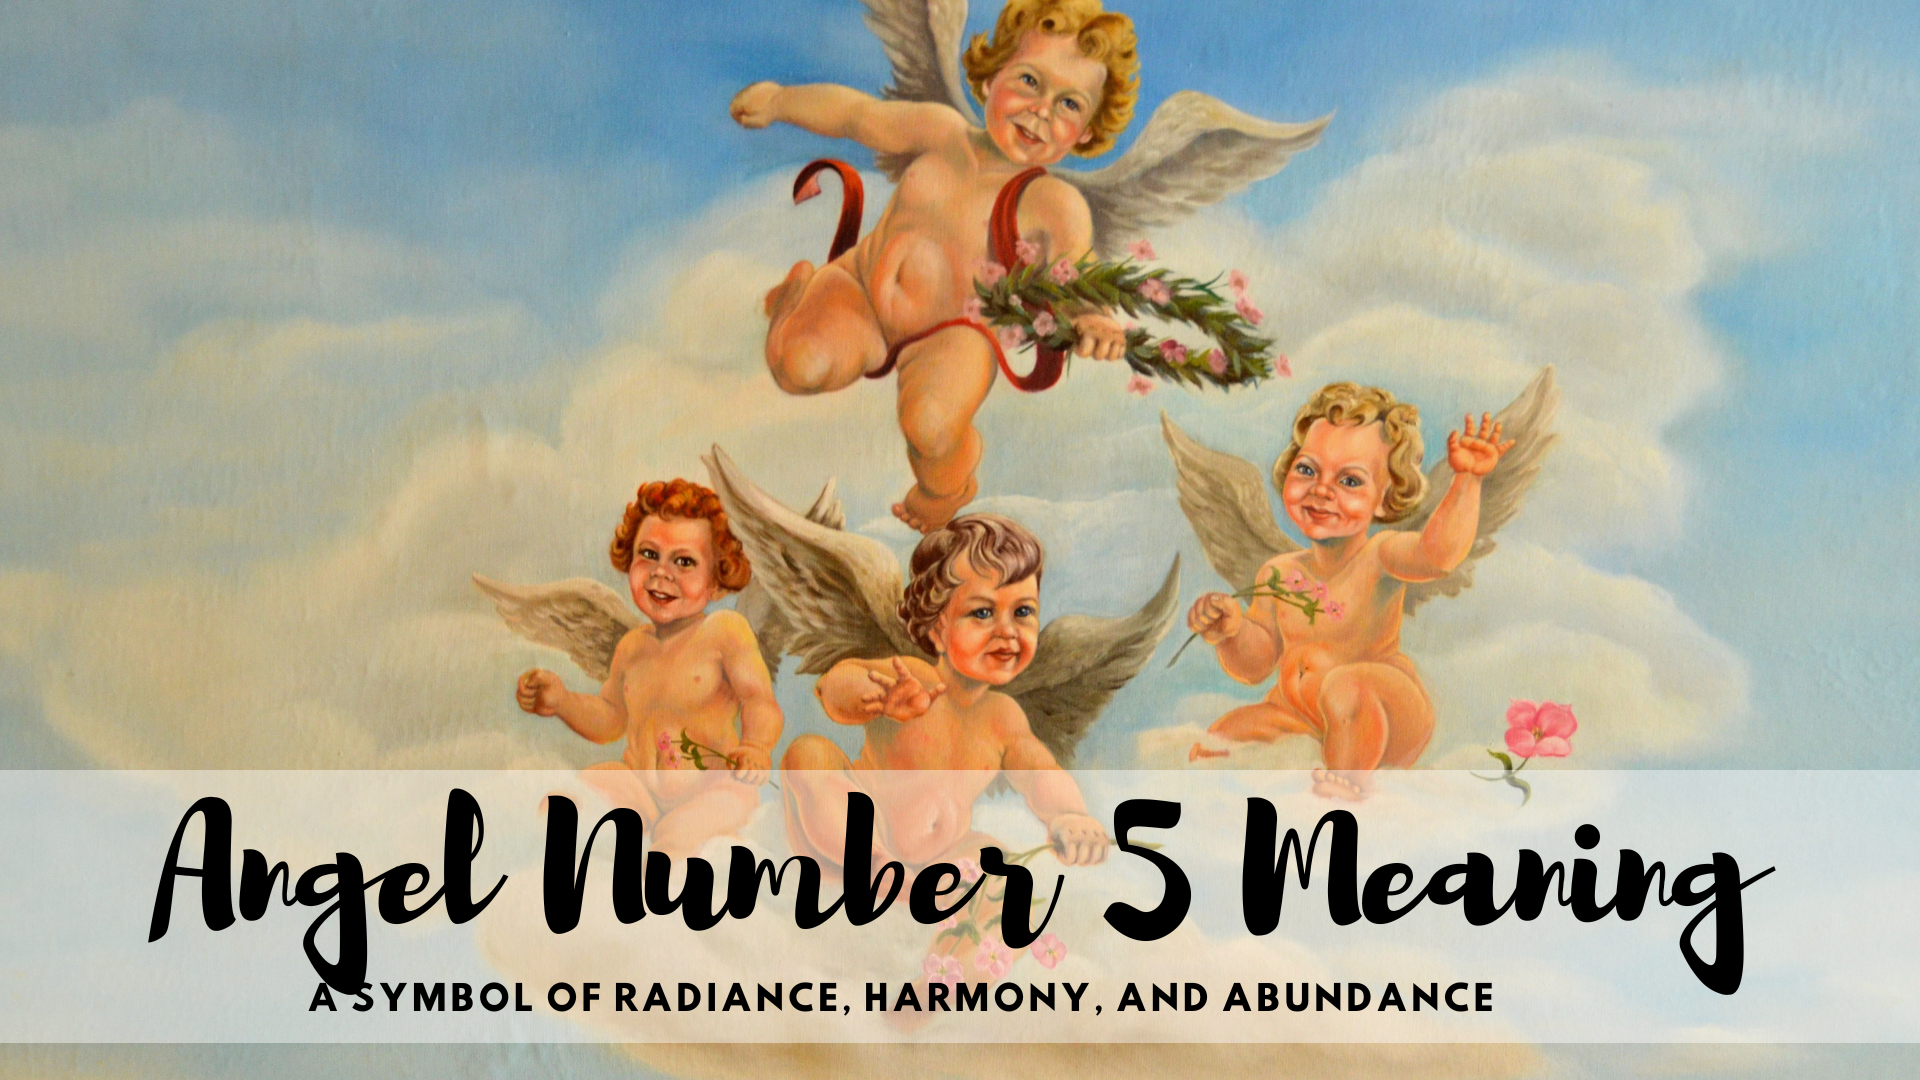 Angel Number 5 Meaning - A Symbol Of Radiance, Harmony, And Abundance